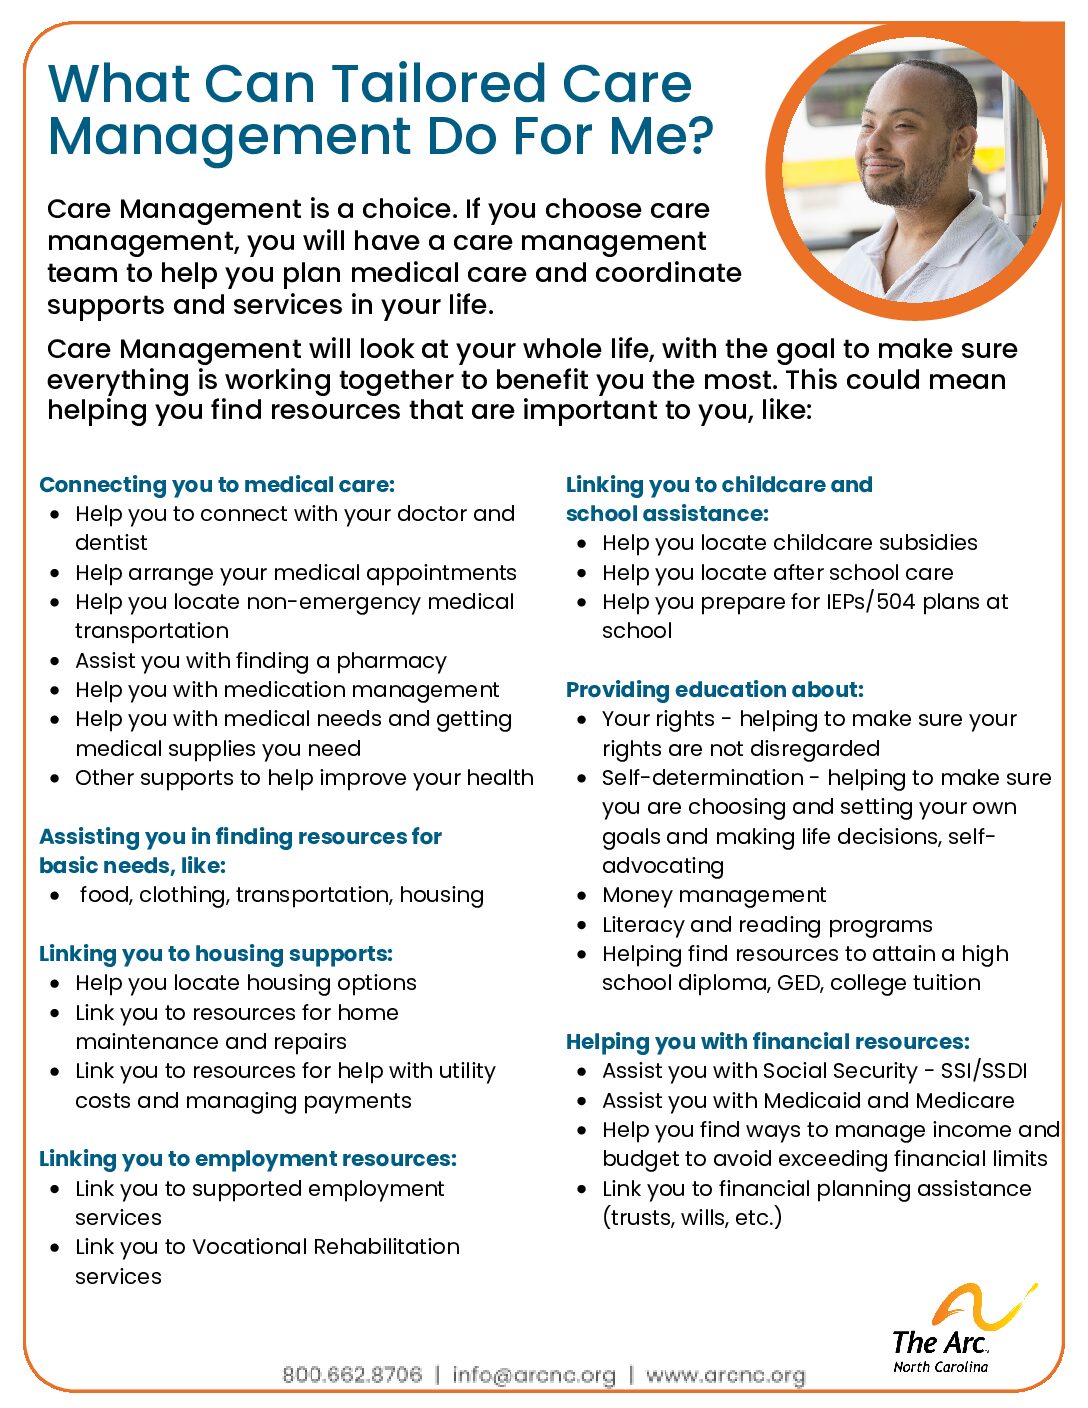 What Can Tailored Care Management Do for Me